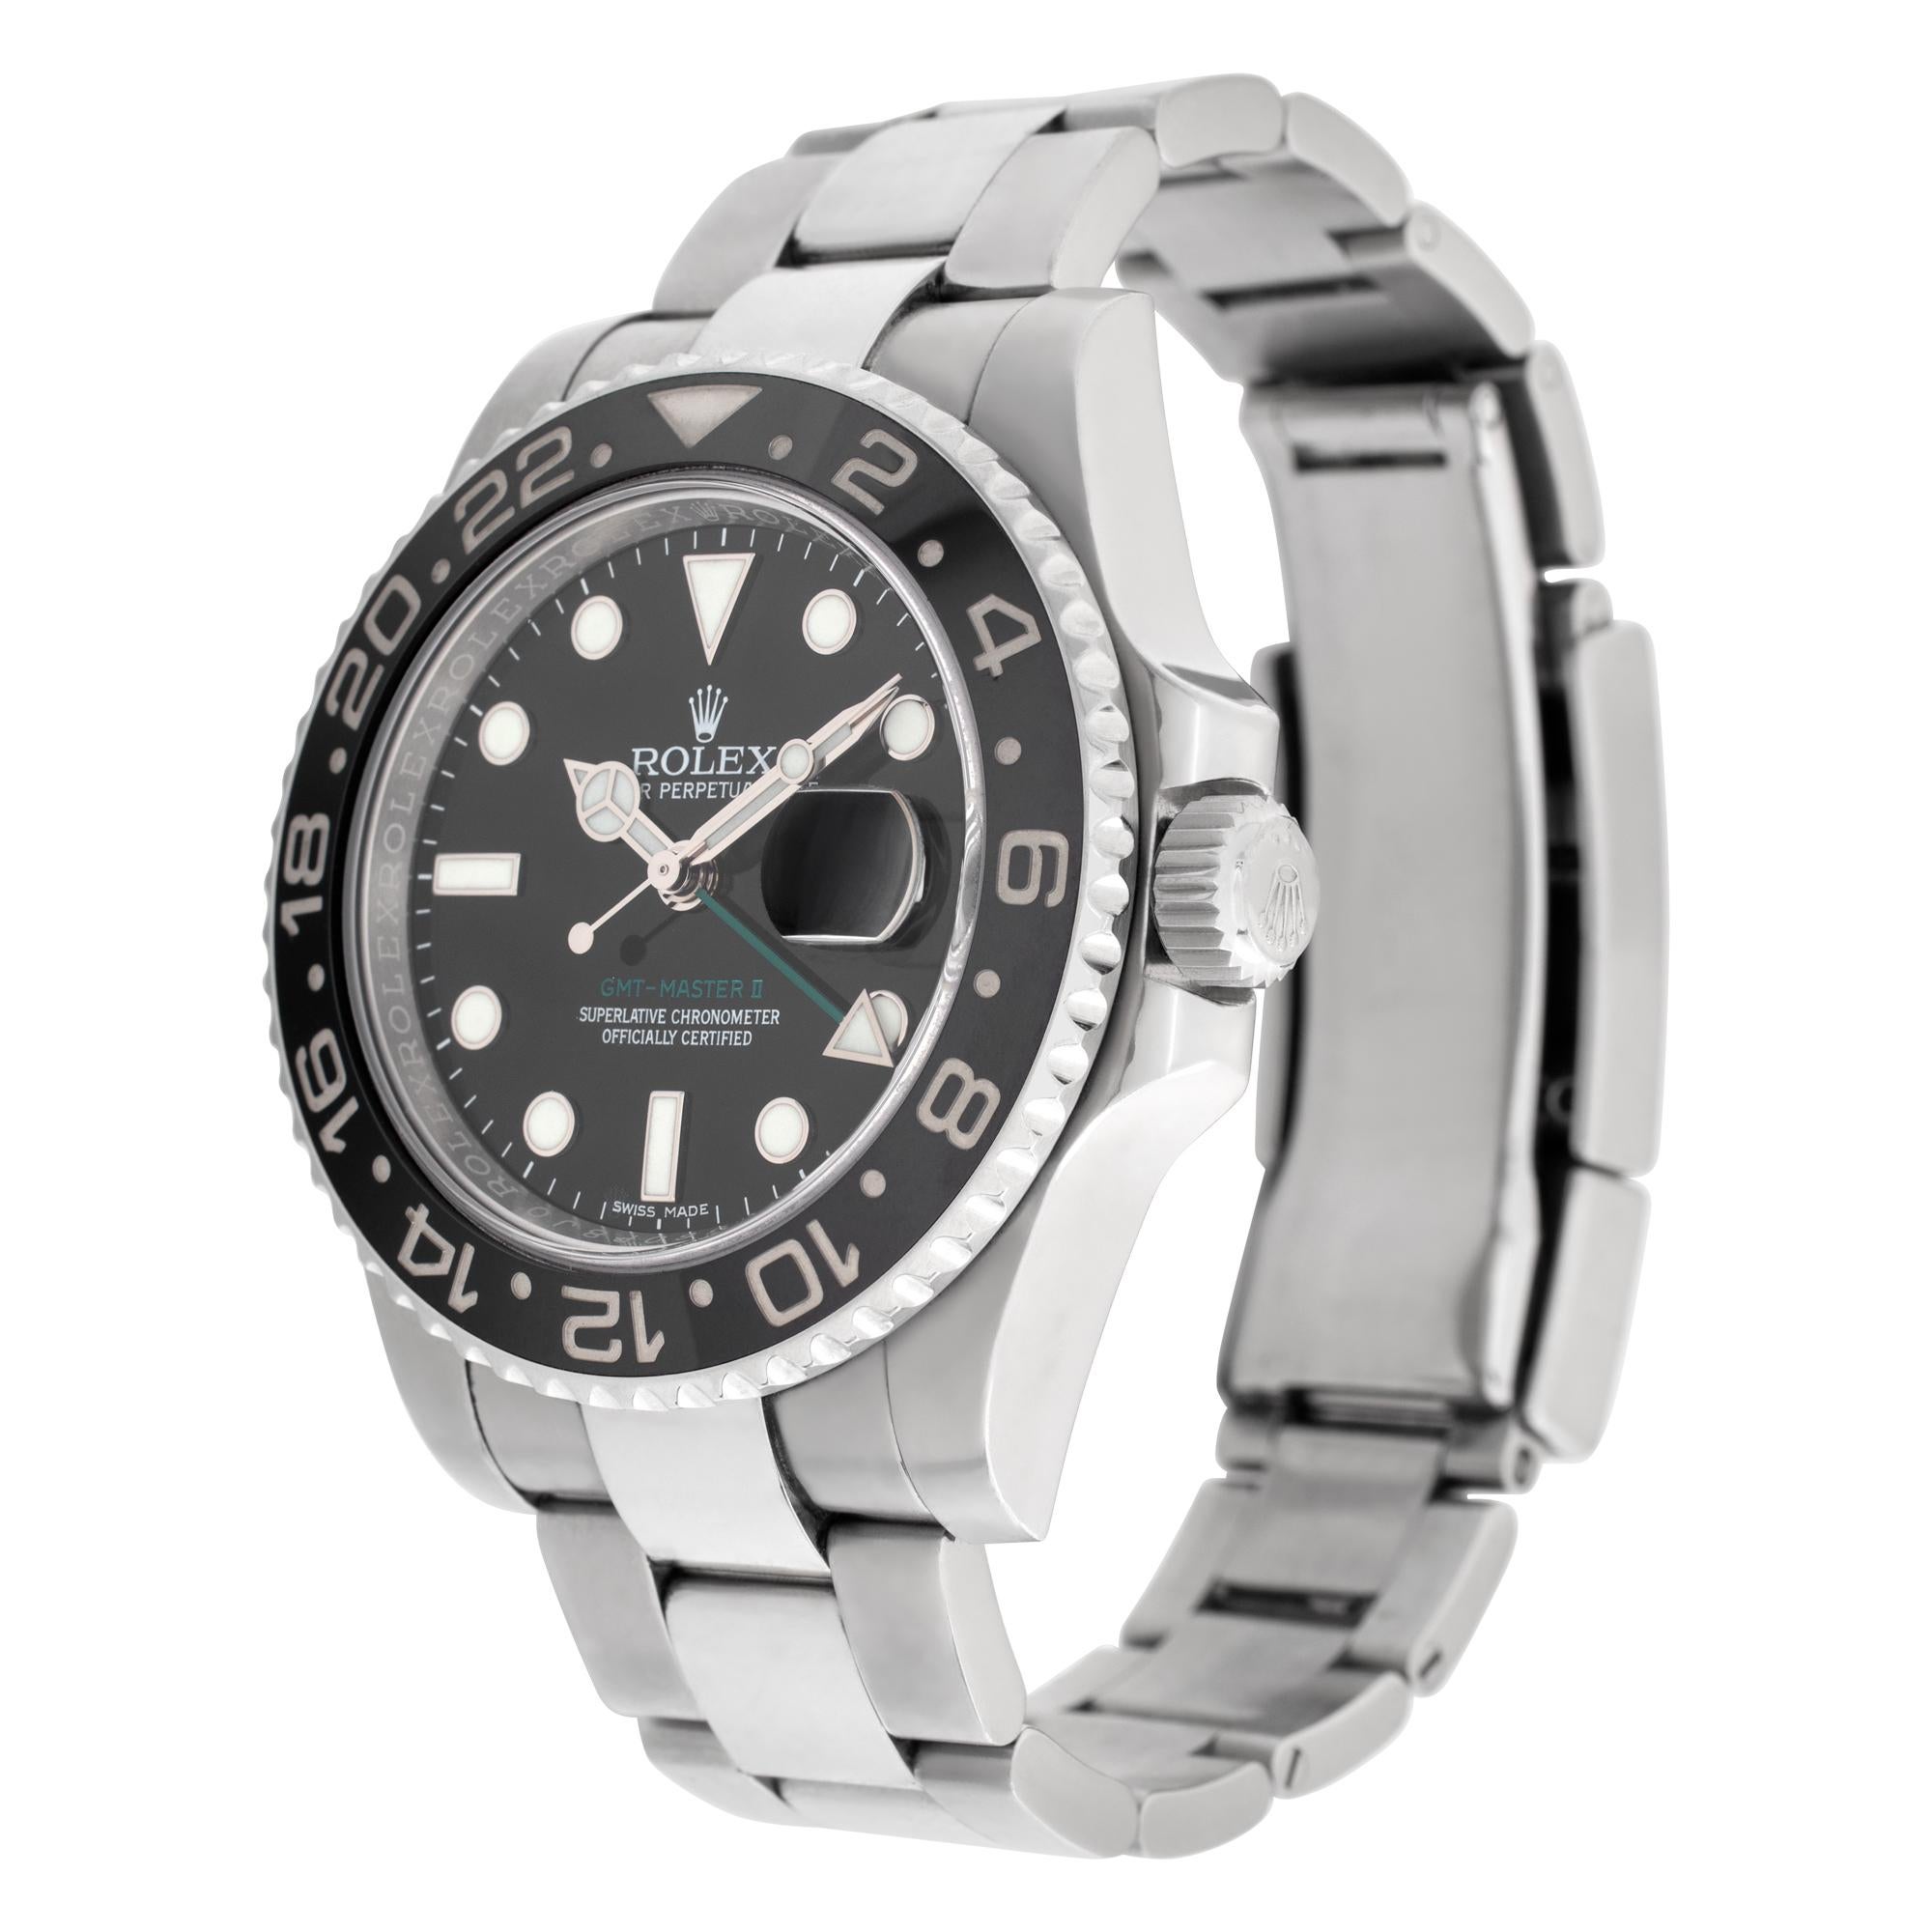 Rolex GMT-Master II in stainless steel with black ceramic bezel. Auto w/ sweep seconds, date and dual time. 40 mm case size. **Bank wire only at this price** Ref 116710LN. Circa 2010s. Fine Pre-owned Rolex Watch. Certified preowned Sport Rolex